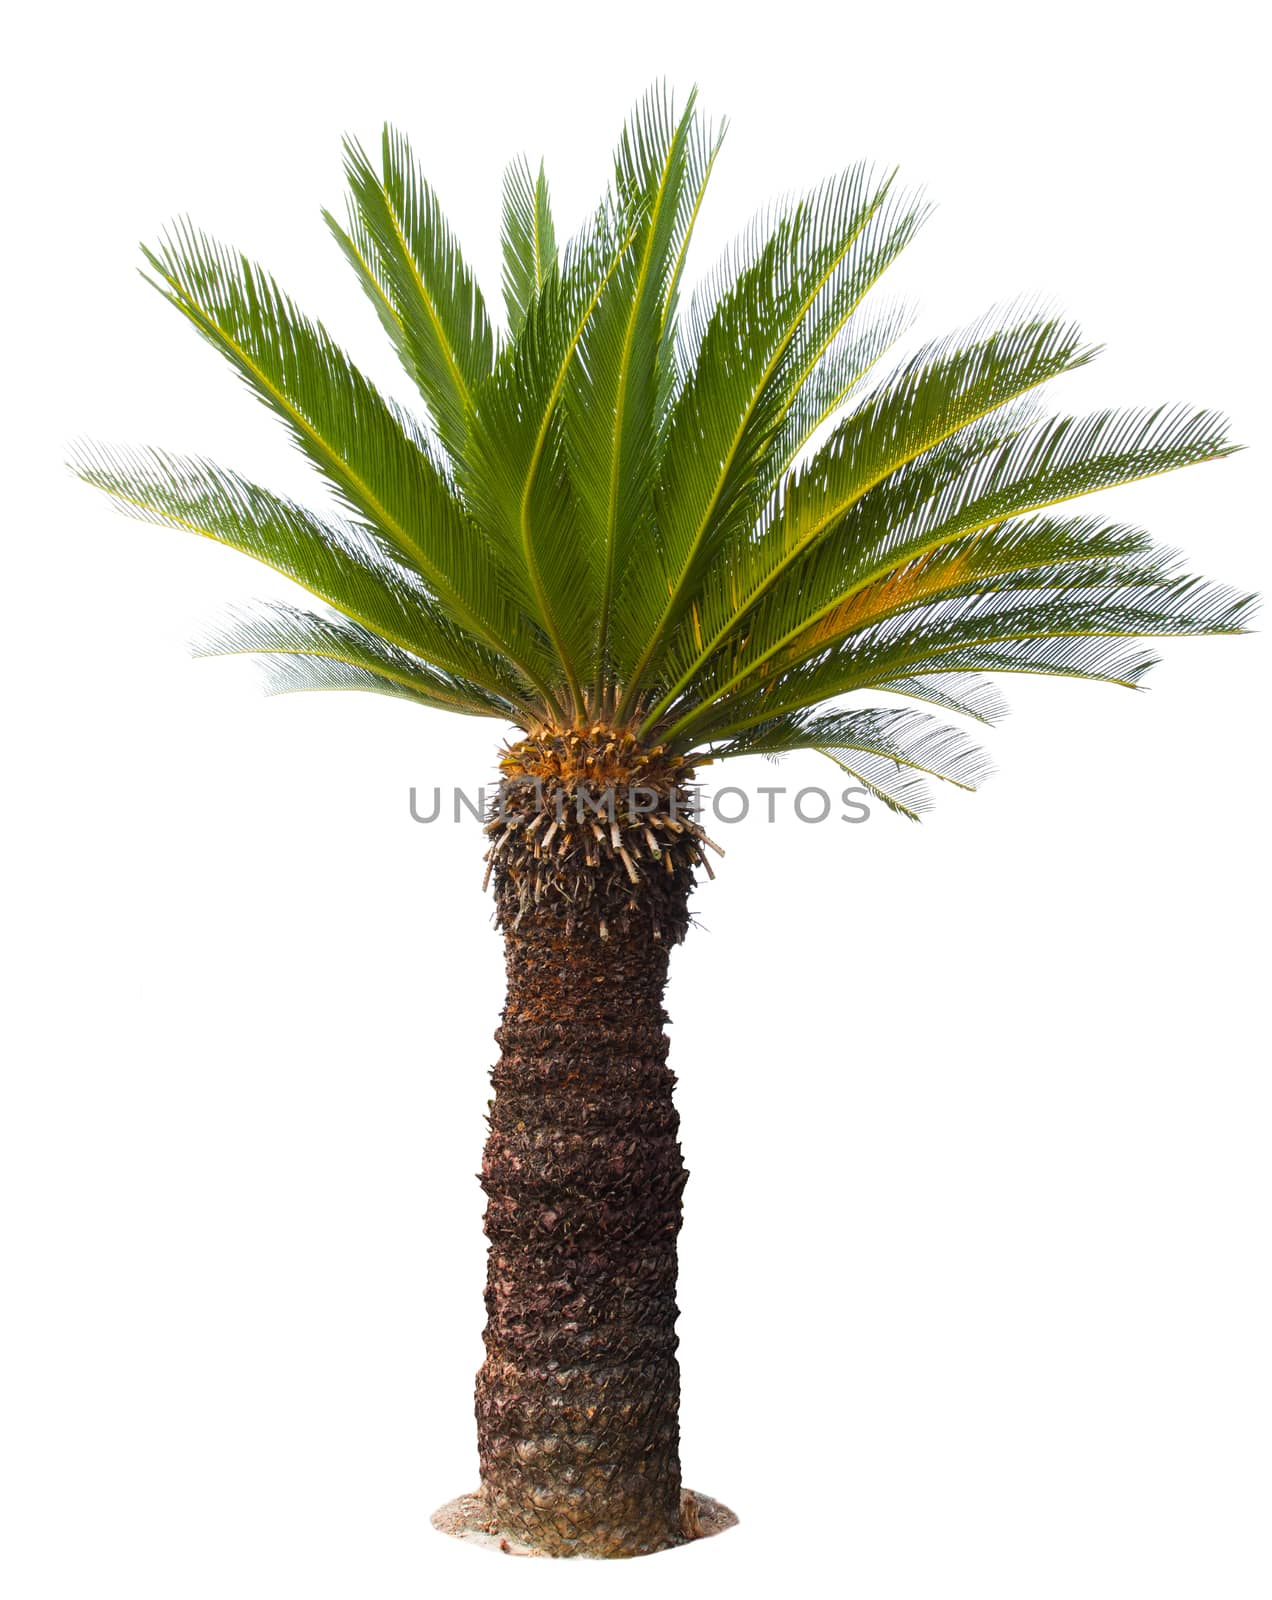 close up Cycad palm tree isolated on white background usefor garden and park decoration